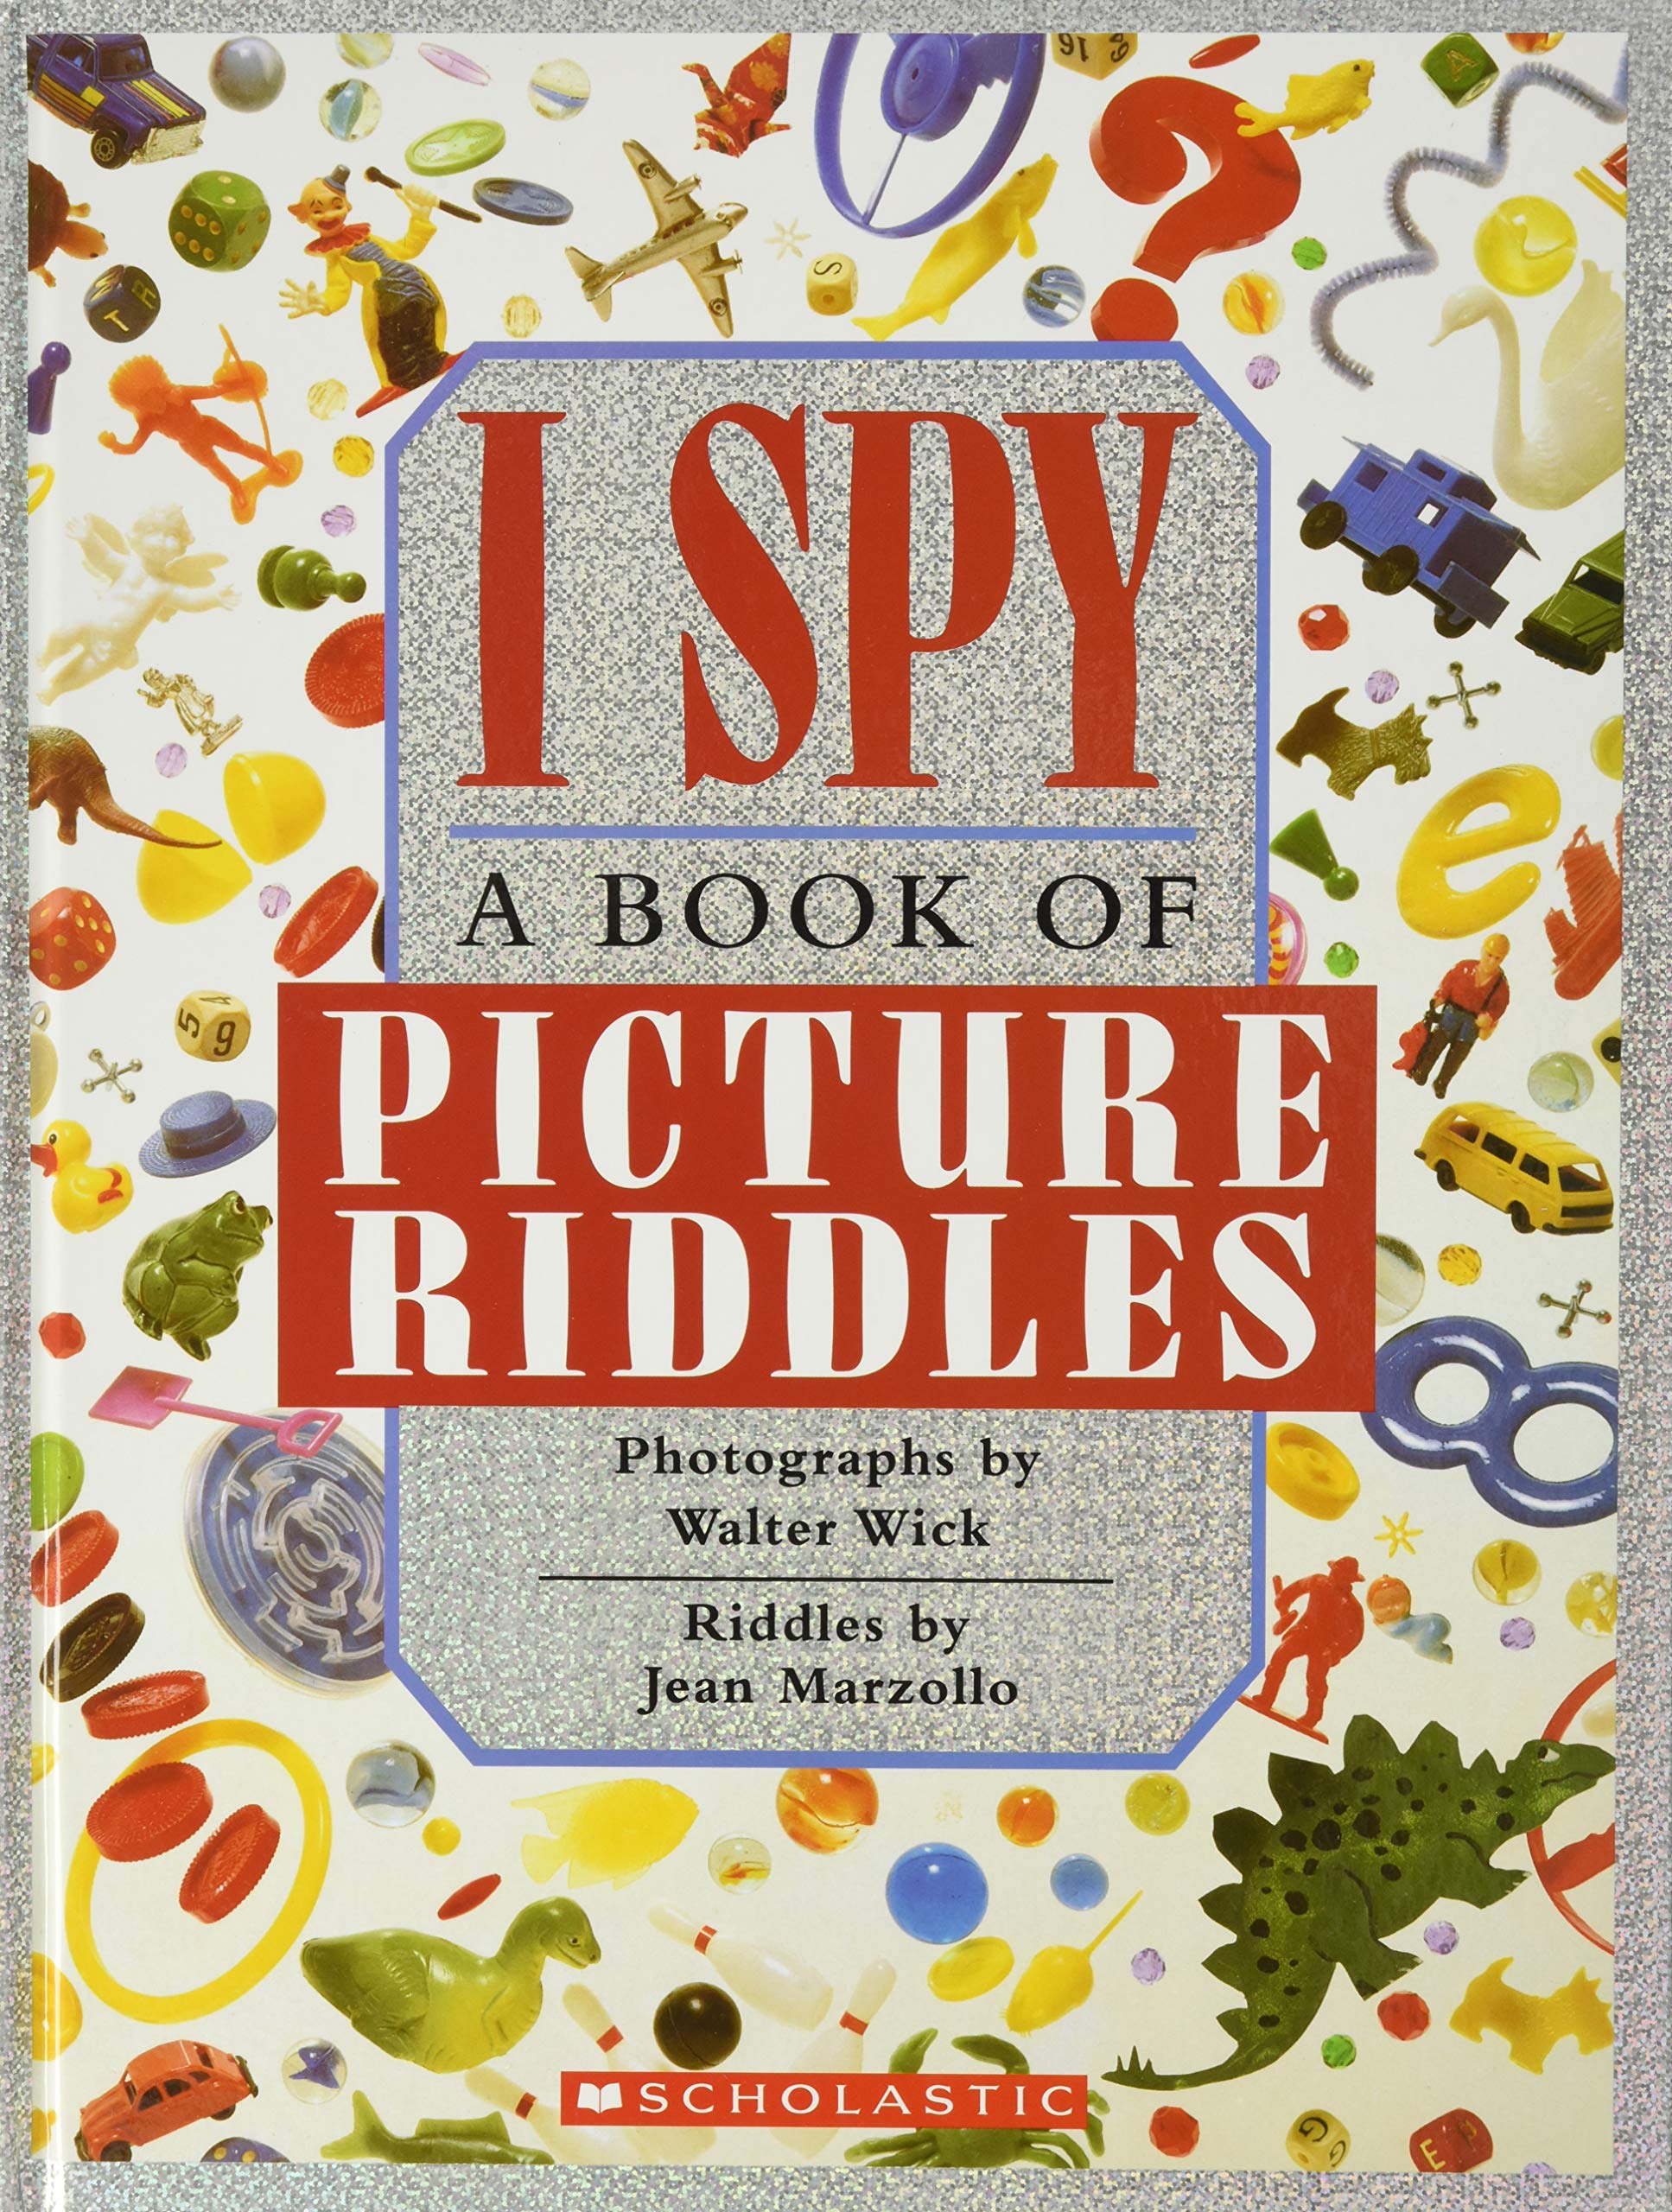 I spy : 6 book of picture riddles